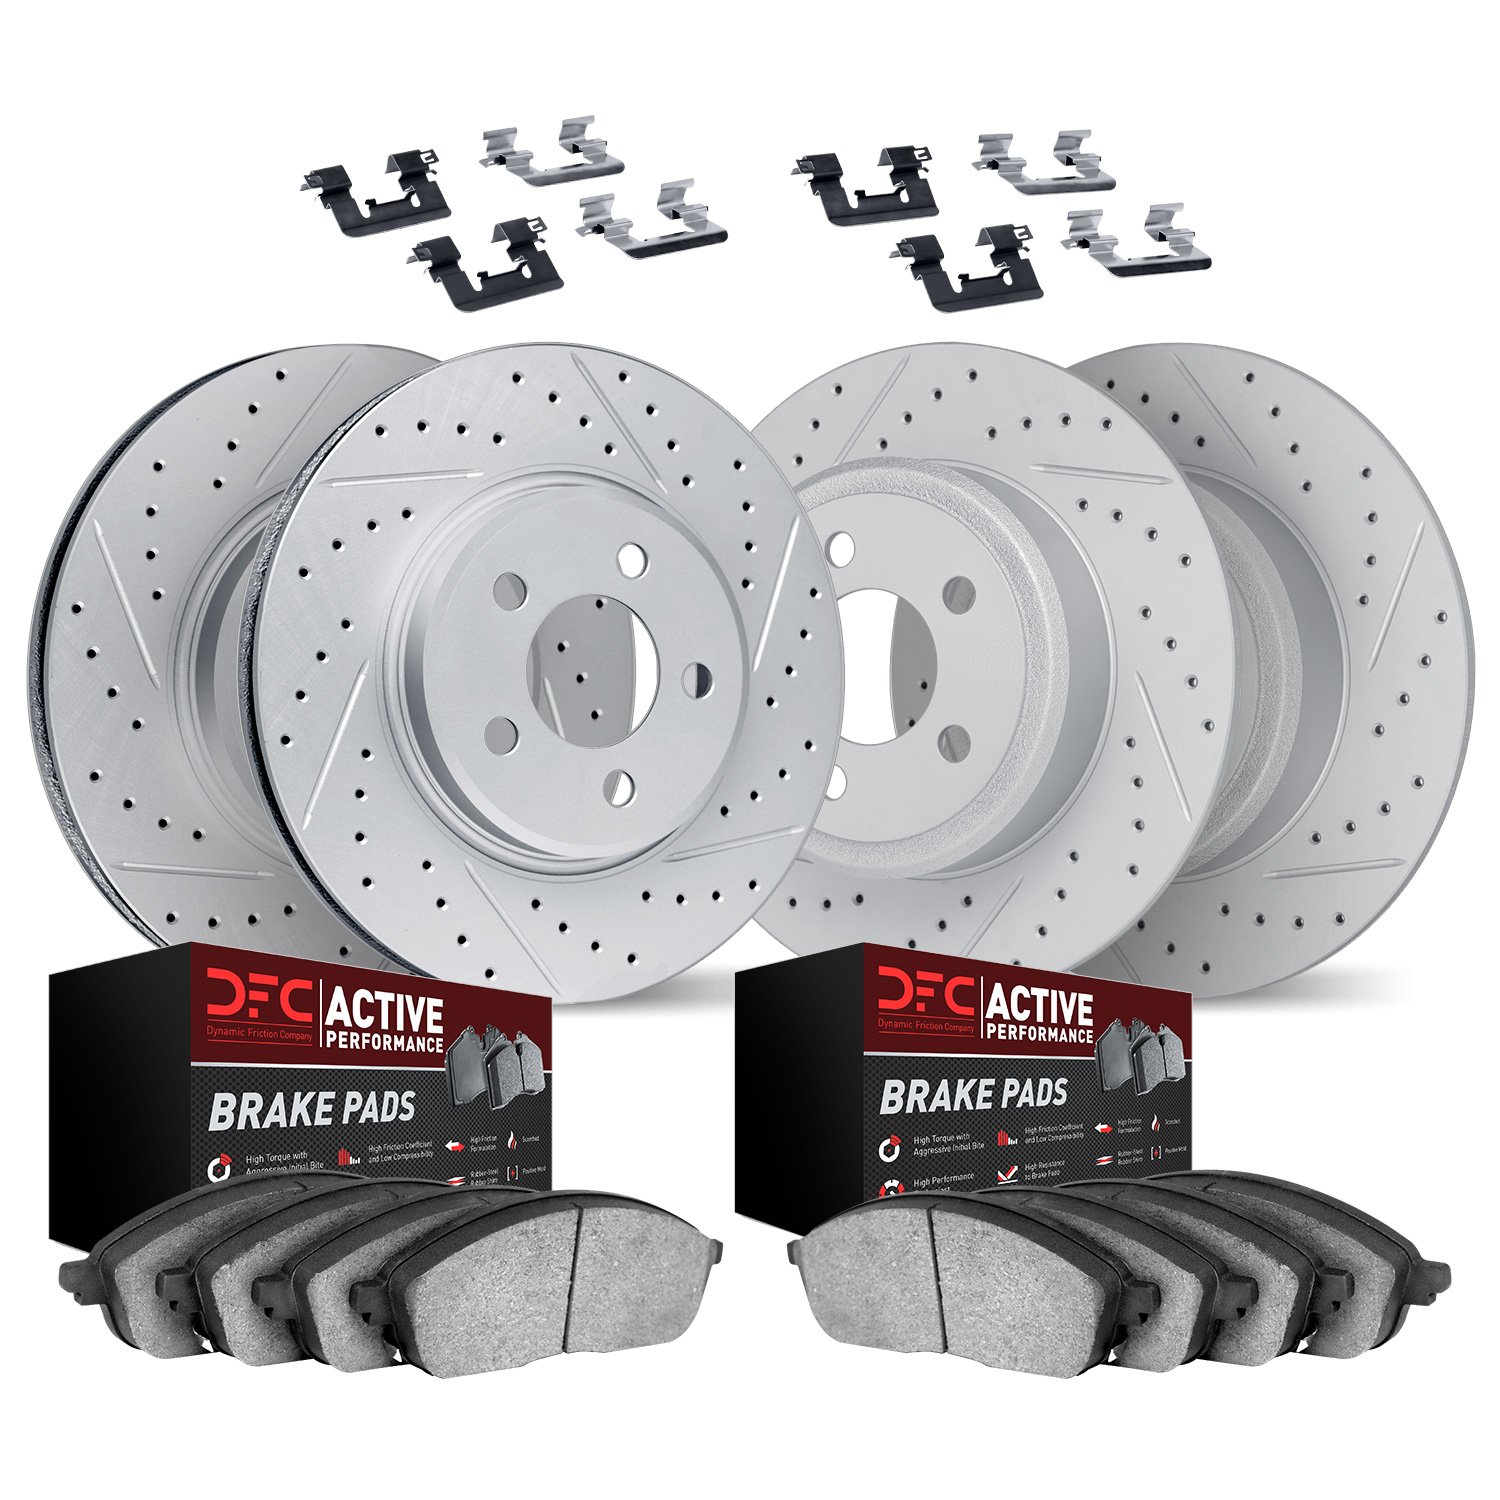 2714-67015 Geoperformance Drilled/Slotted Brake Rotors with Active Performance Pads Kit & Hardware, 2004-2005 Infiniti/Nissan, P